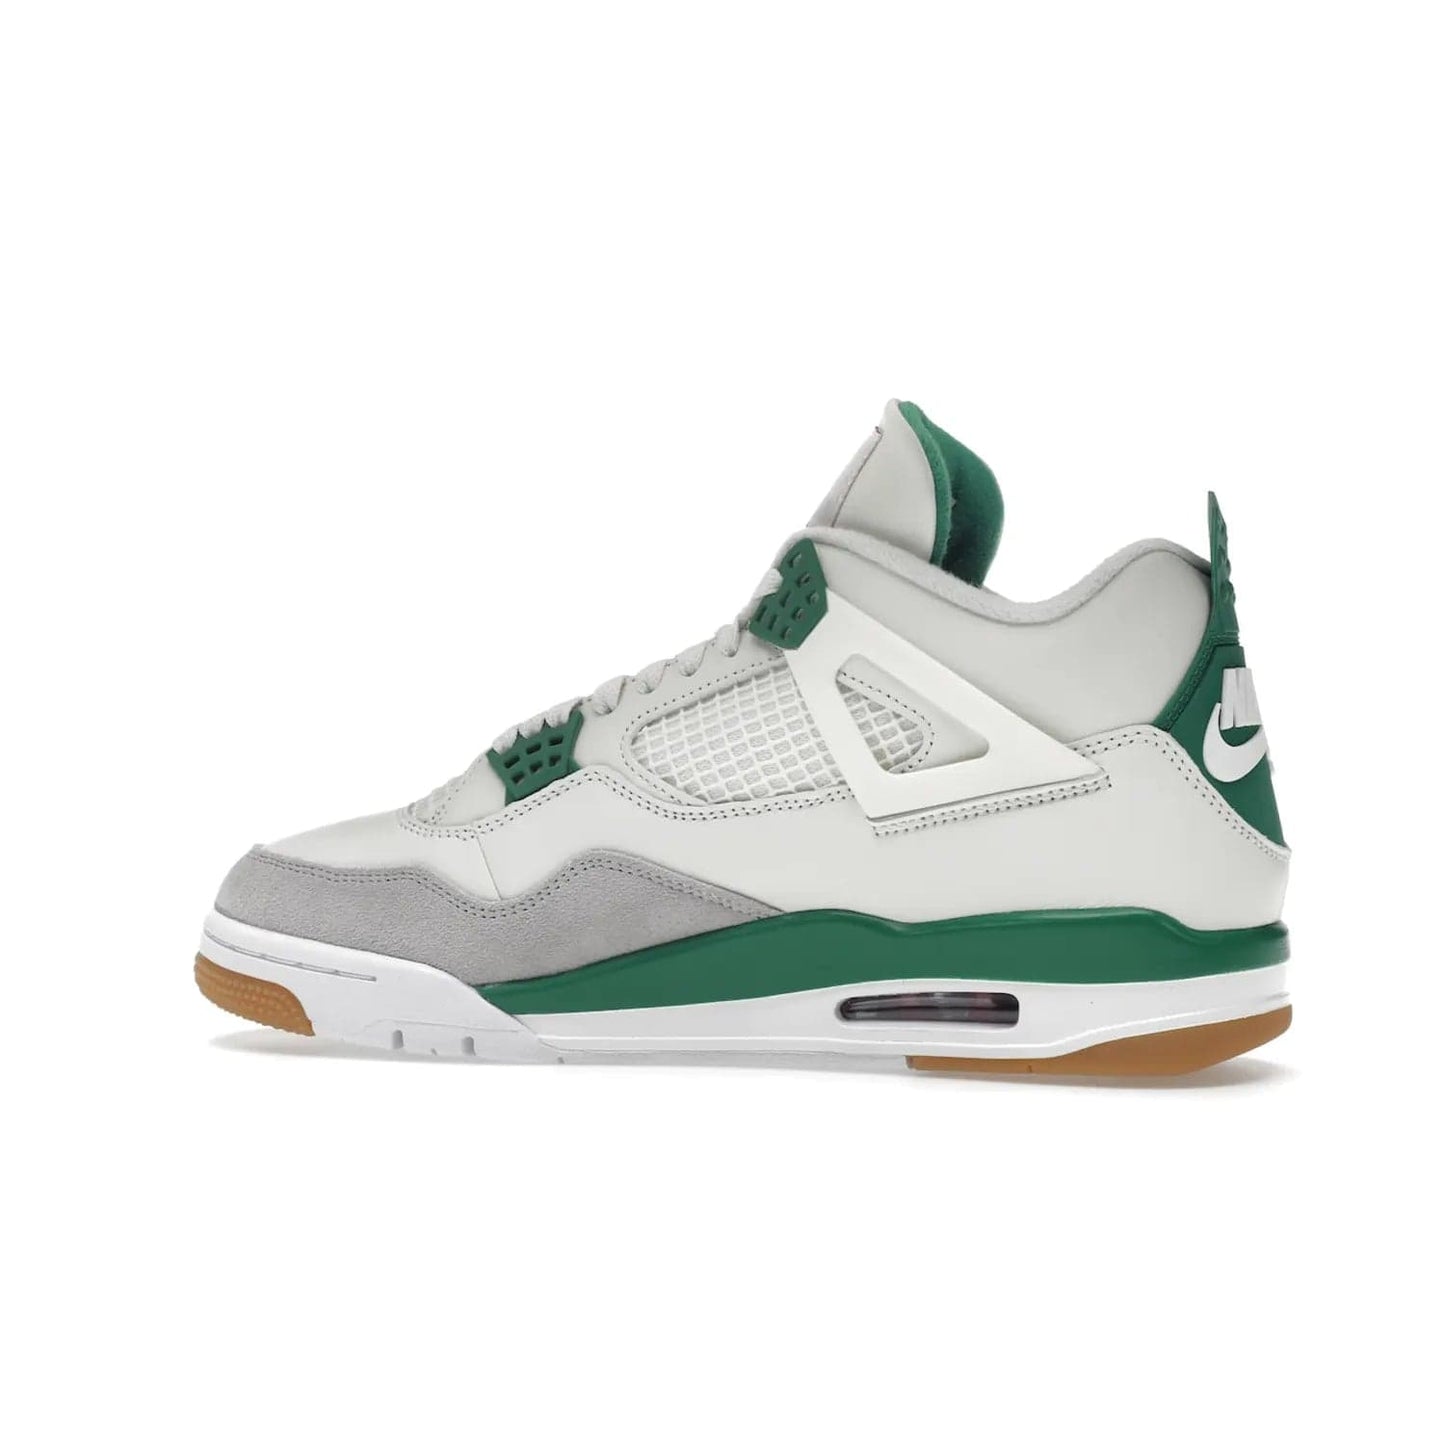 Jordan 4 Retro SB Pine Green - Image 21 - Only at www.BallersClubKickz.com - A white leather upper combined with a Neutral Grey suede mudguard gives this limited Air Jordan 4 Retro SB Pine Green sneaker its unmistakable style. Released March 20, 2023, the Jordan 4 Retro SB features a white and Pine Green midsole plus a red air unit with a gum outsole for grip. The perfect blend of Nike SB skateboarding and Jordan 4 classic design.